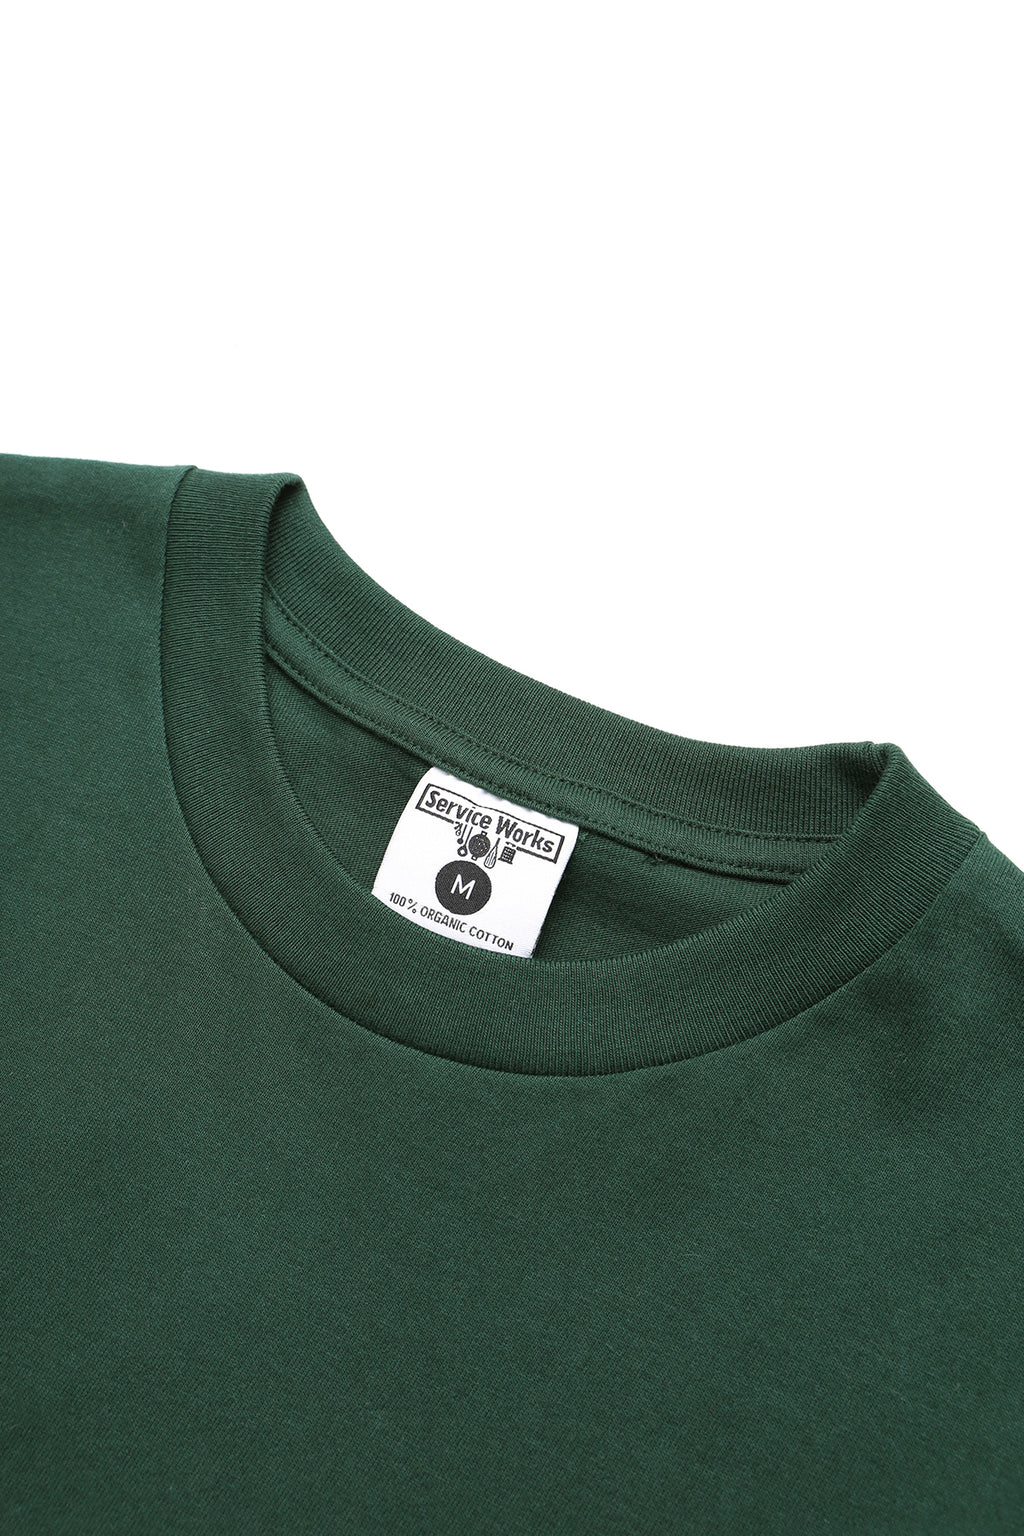 Service Works - Scribble Logo Tee - Forest